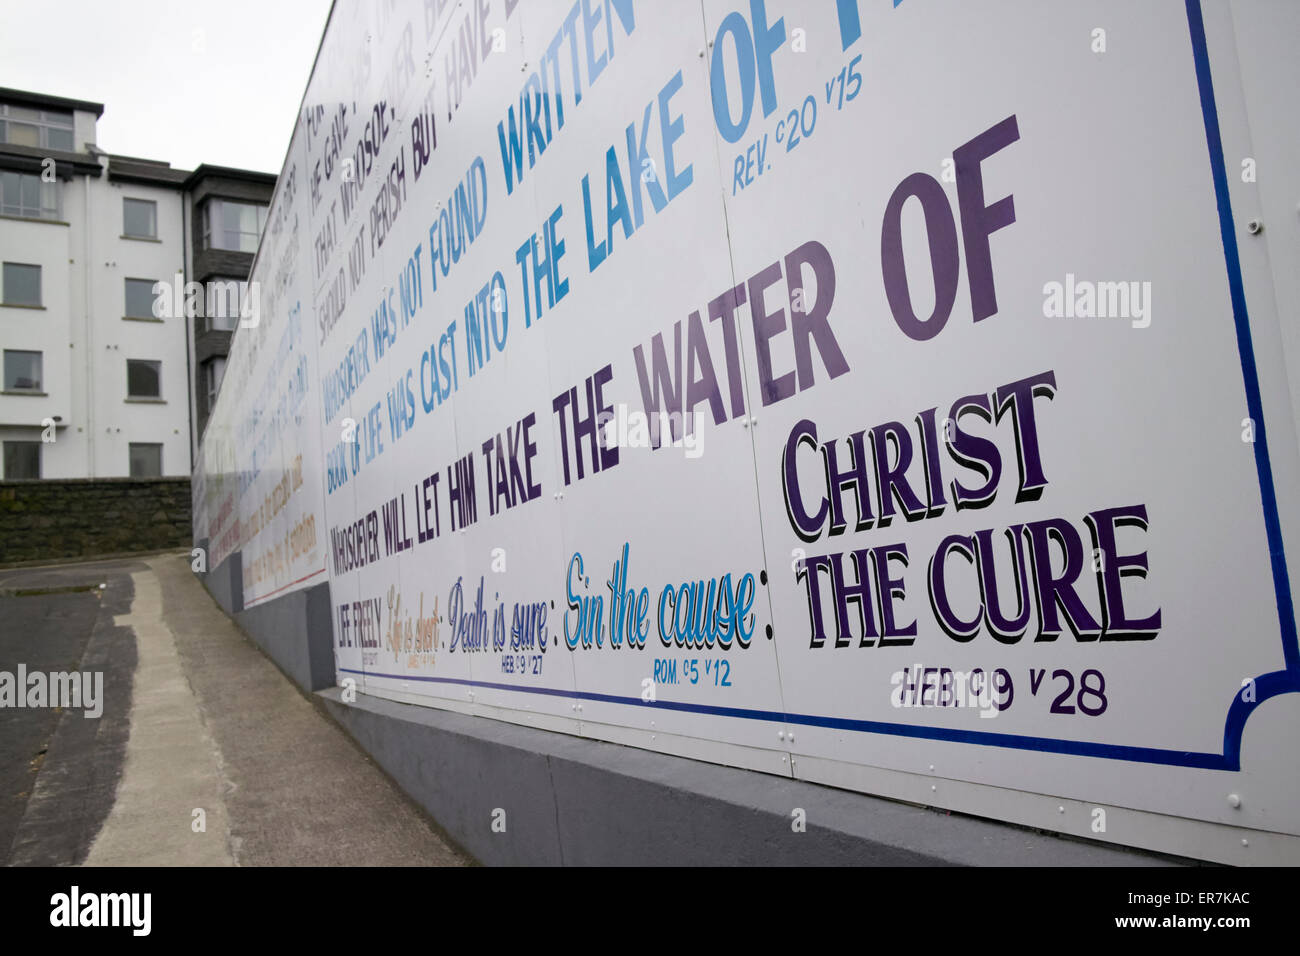 evangelical christian slogans on the wall of a house in northern ireland Stock Photo